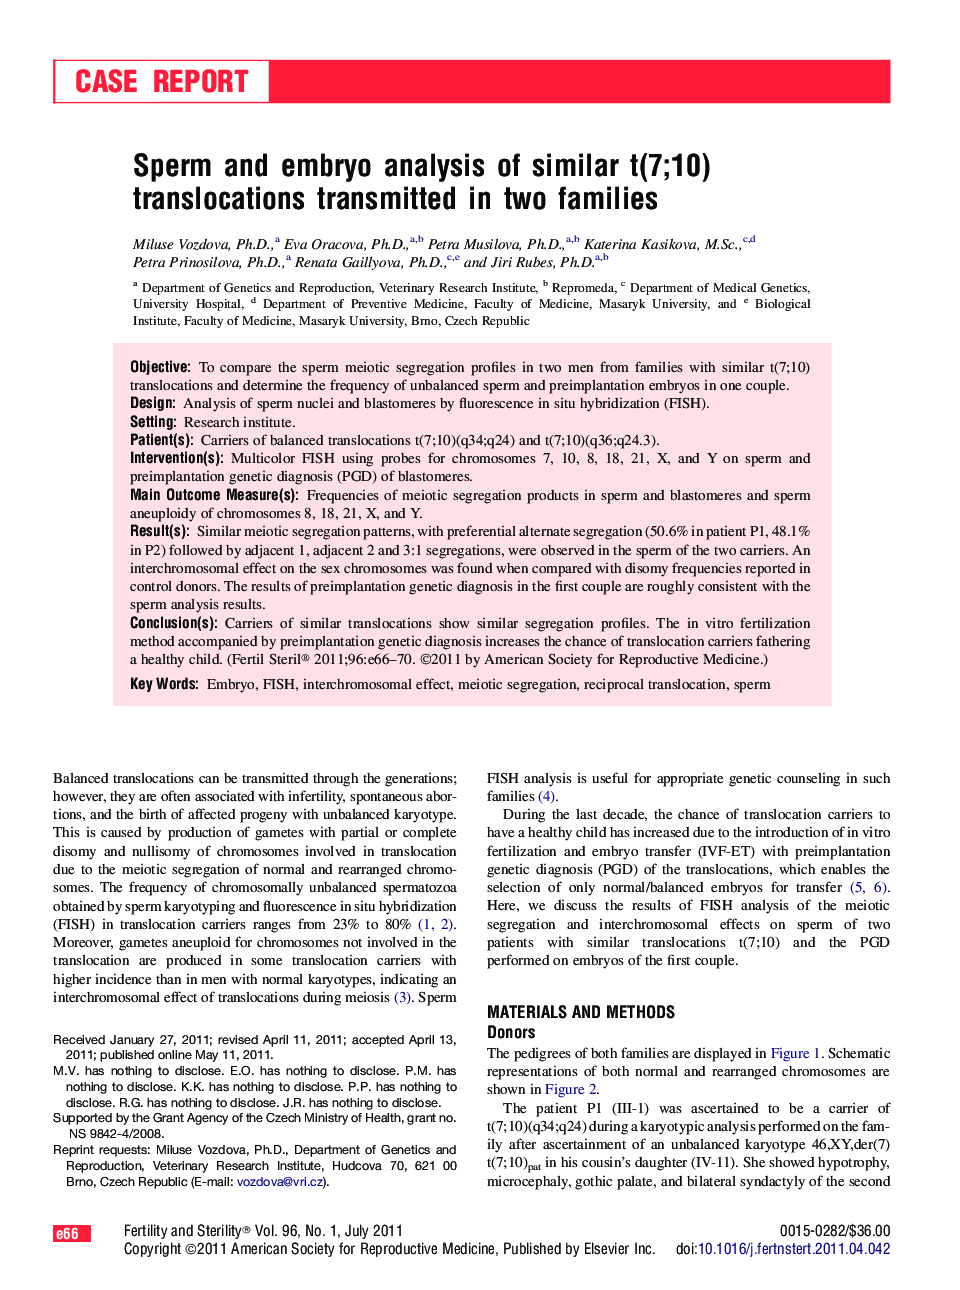 Sperm and embryo analysis of similar t(7;10) translocations transmitted in two families 